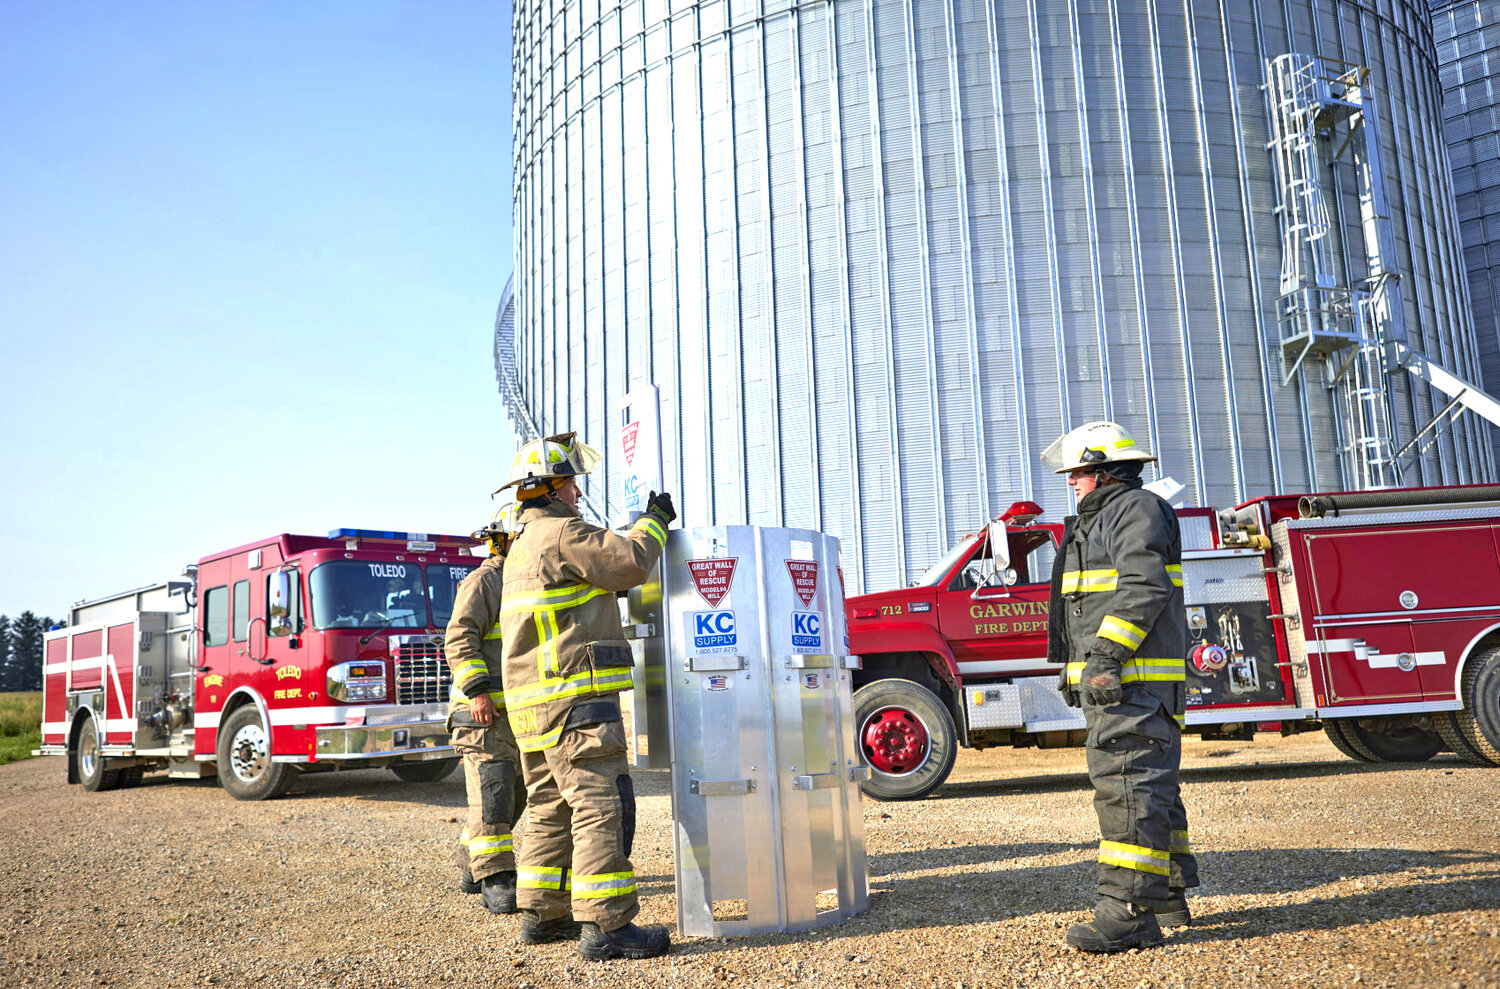 Nationwide and its partners are providing life-saving grain rescue tubes and training to 60 fire departments across rural America through its 2023 Grain Bin Safety campaign. The photo shows firefighters from Toledo and Garwin, Iowa, training with a rescue tube.